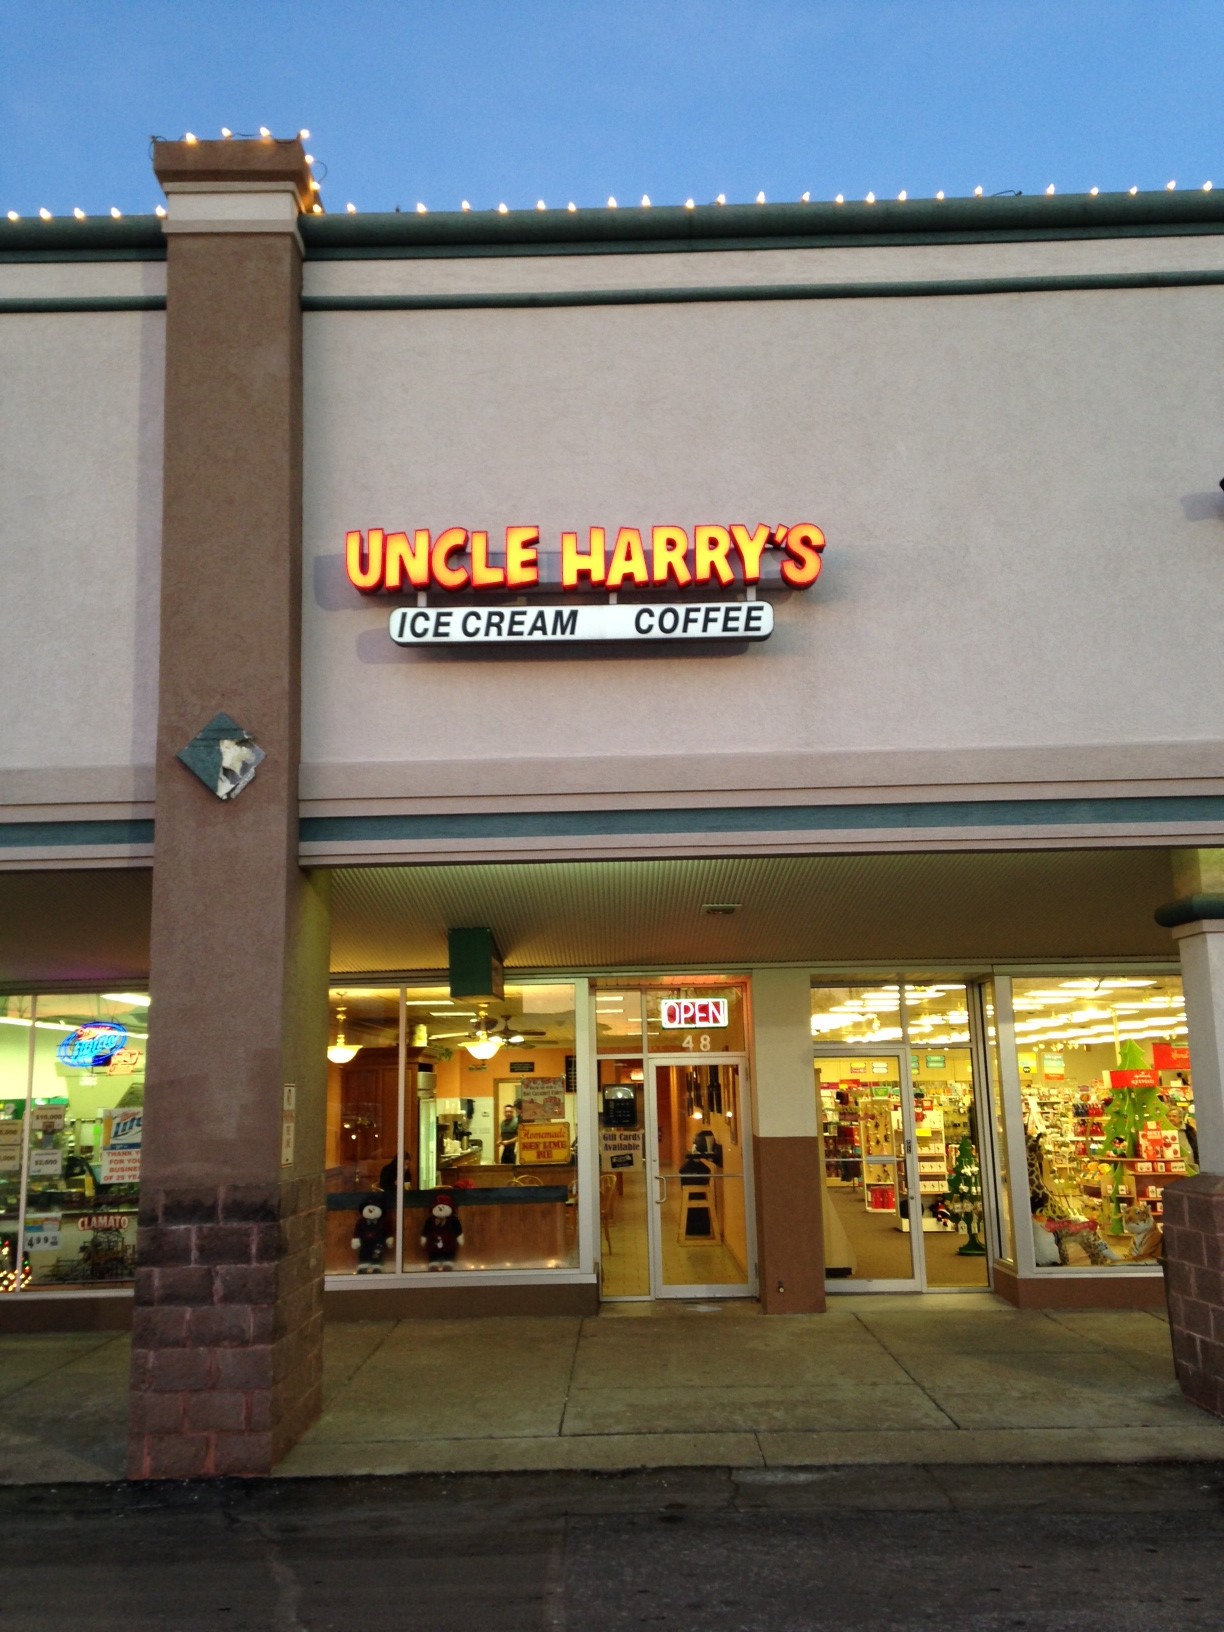 Uncle Harry's Ice Cream - Addison, IL.  Our favorite ice cream place!